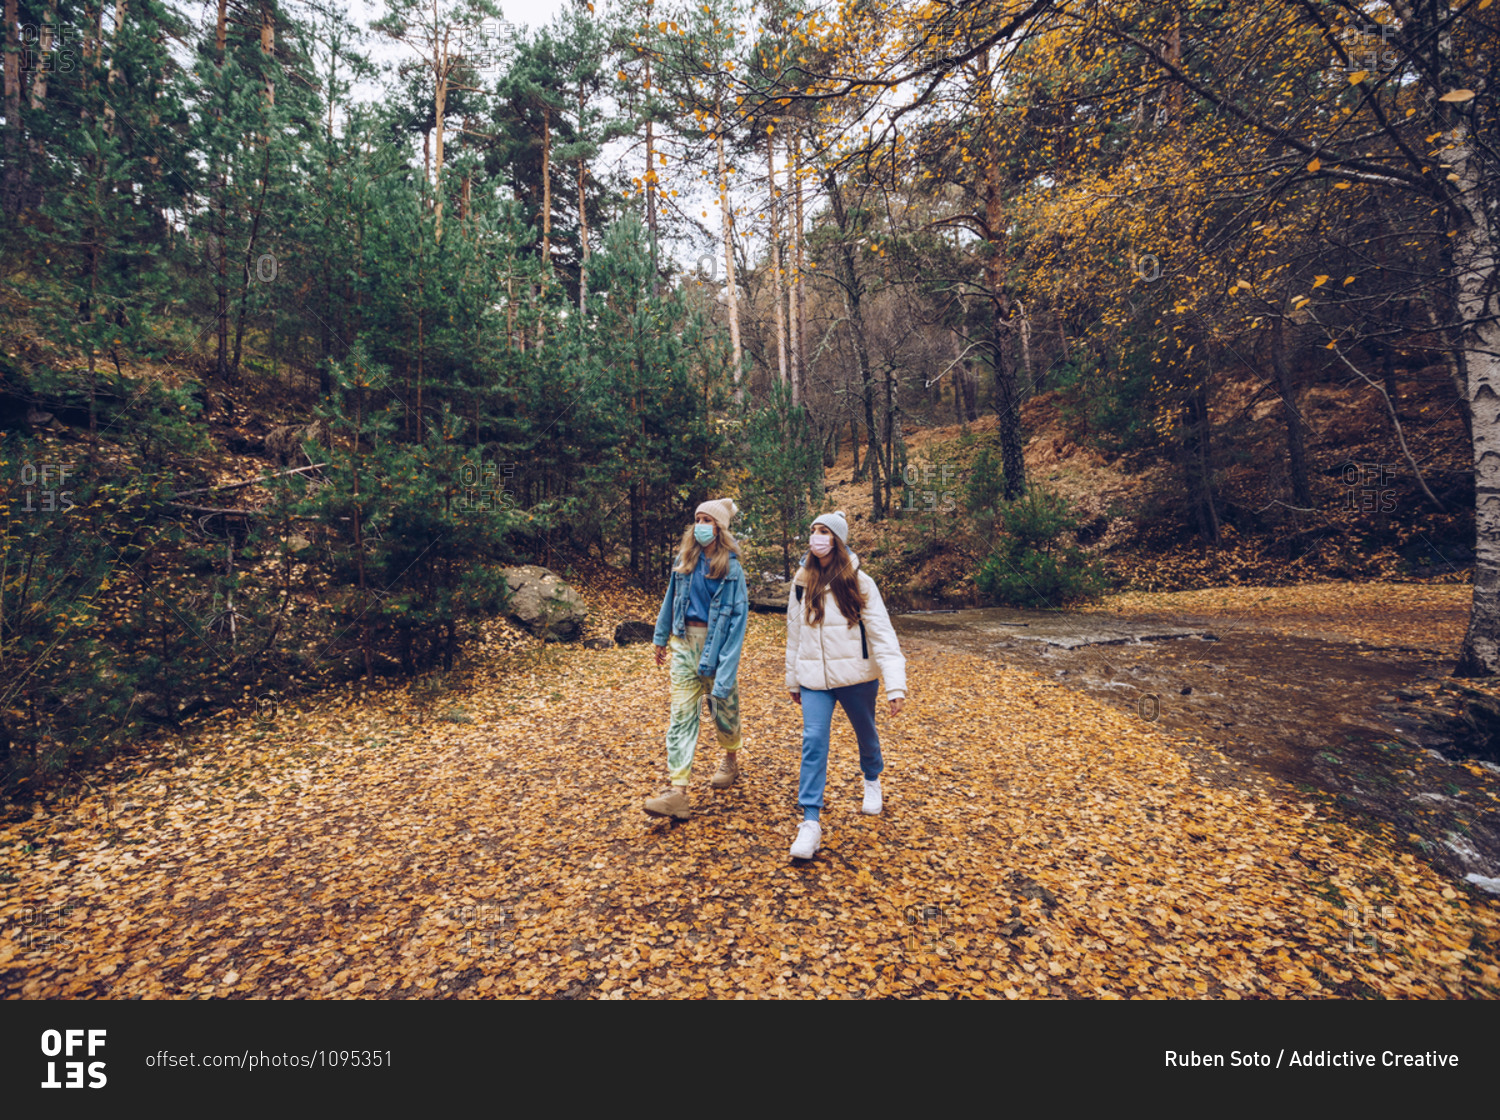 Young female explorers with face masks walking in autumn woods near river during coronavirus pandemic